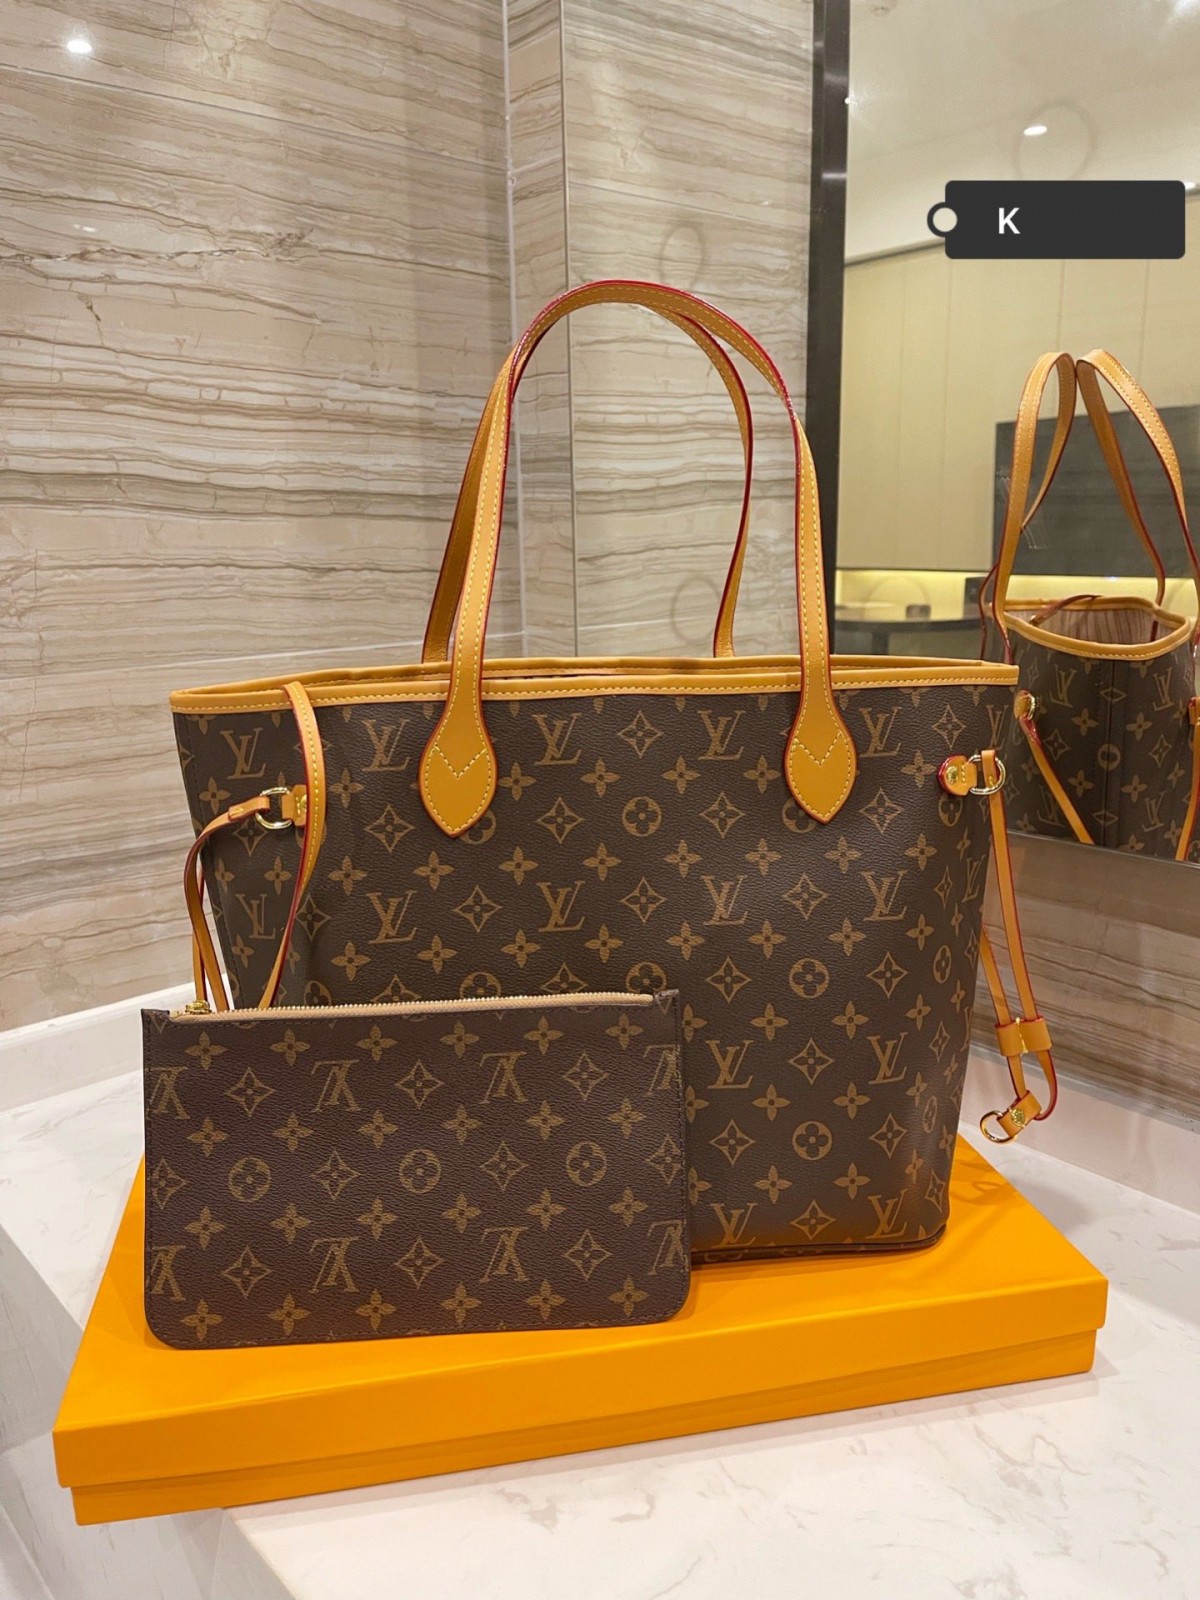 As one of Louis Vuitton’s classic replica bags Never full, the price is only $199? (2022 special)-Best Quality Fake designer Bag Review, Replica designer bag ru